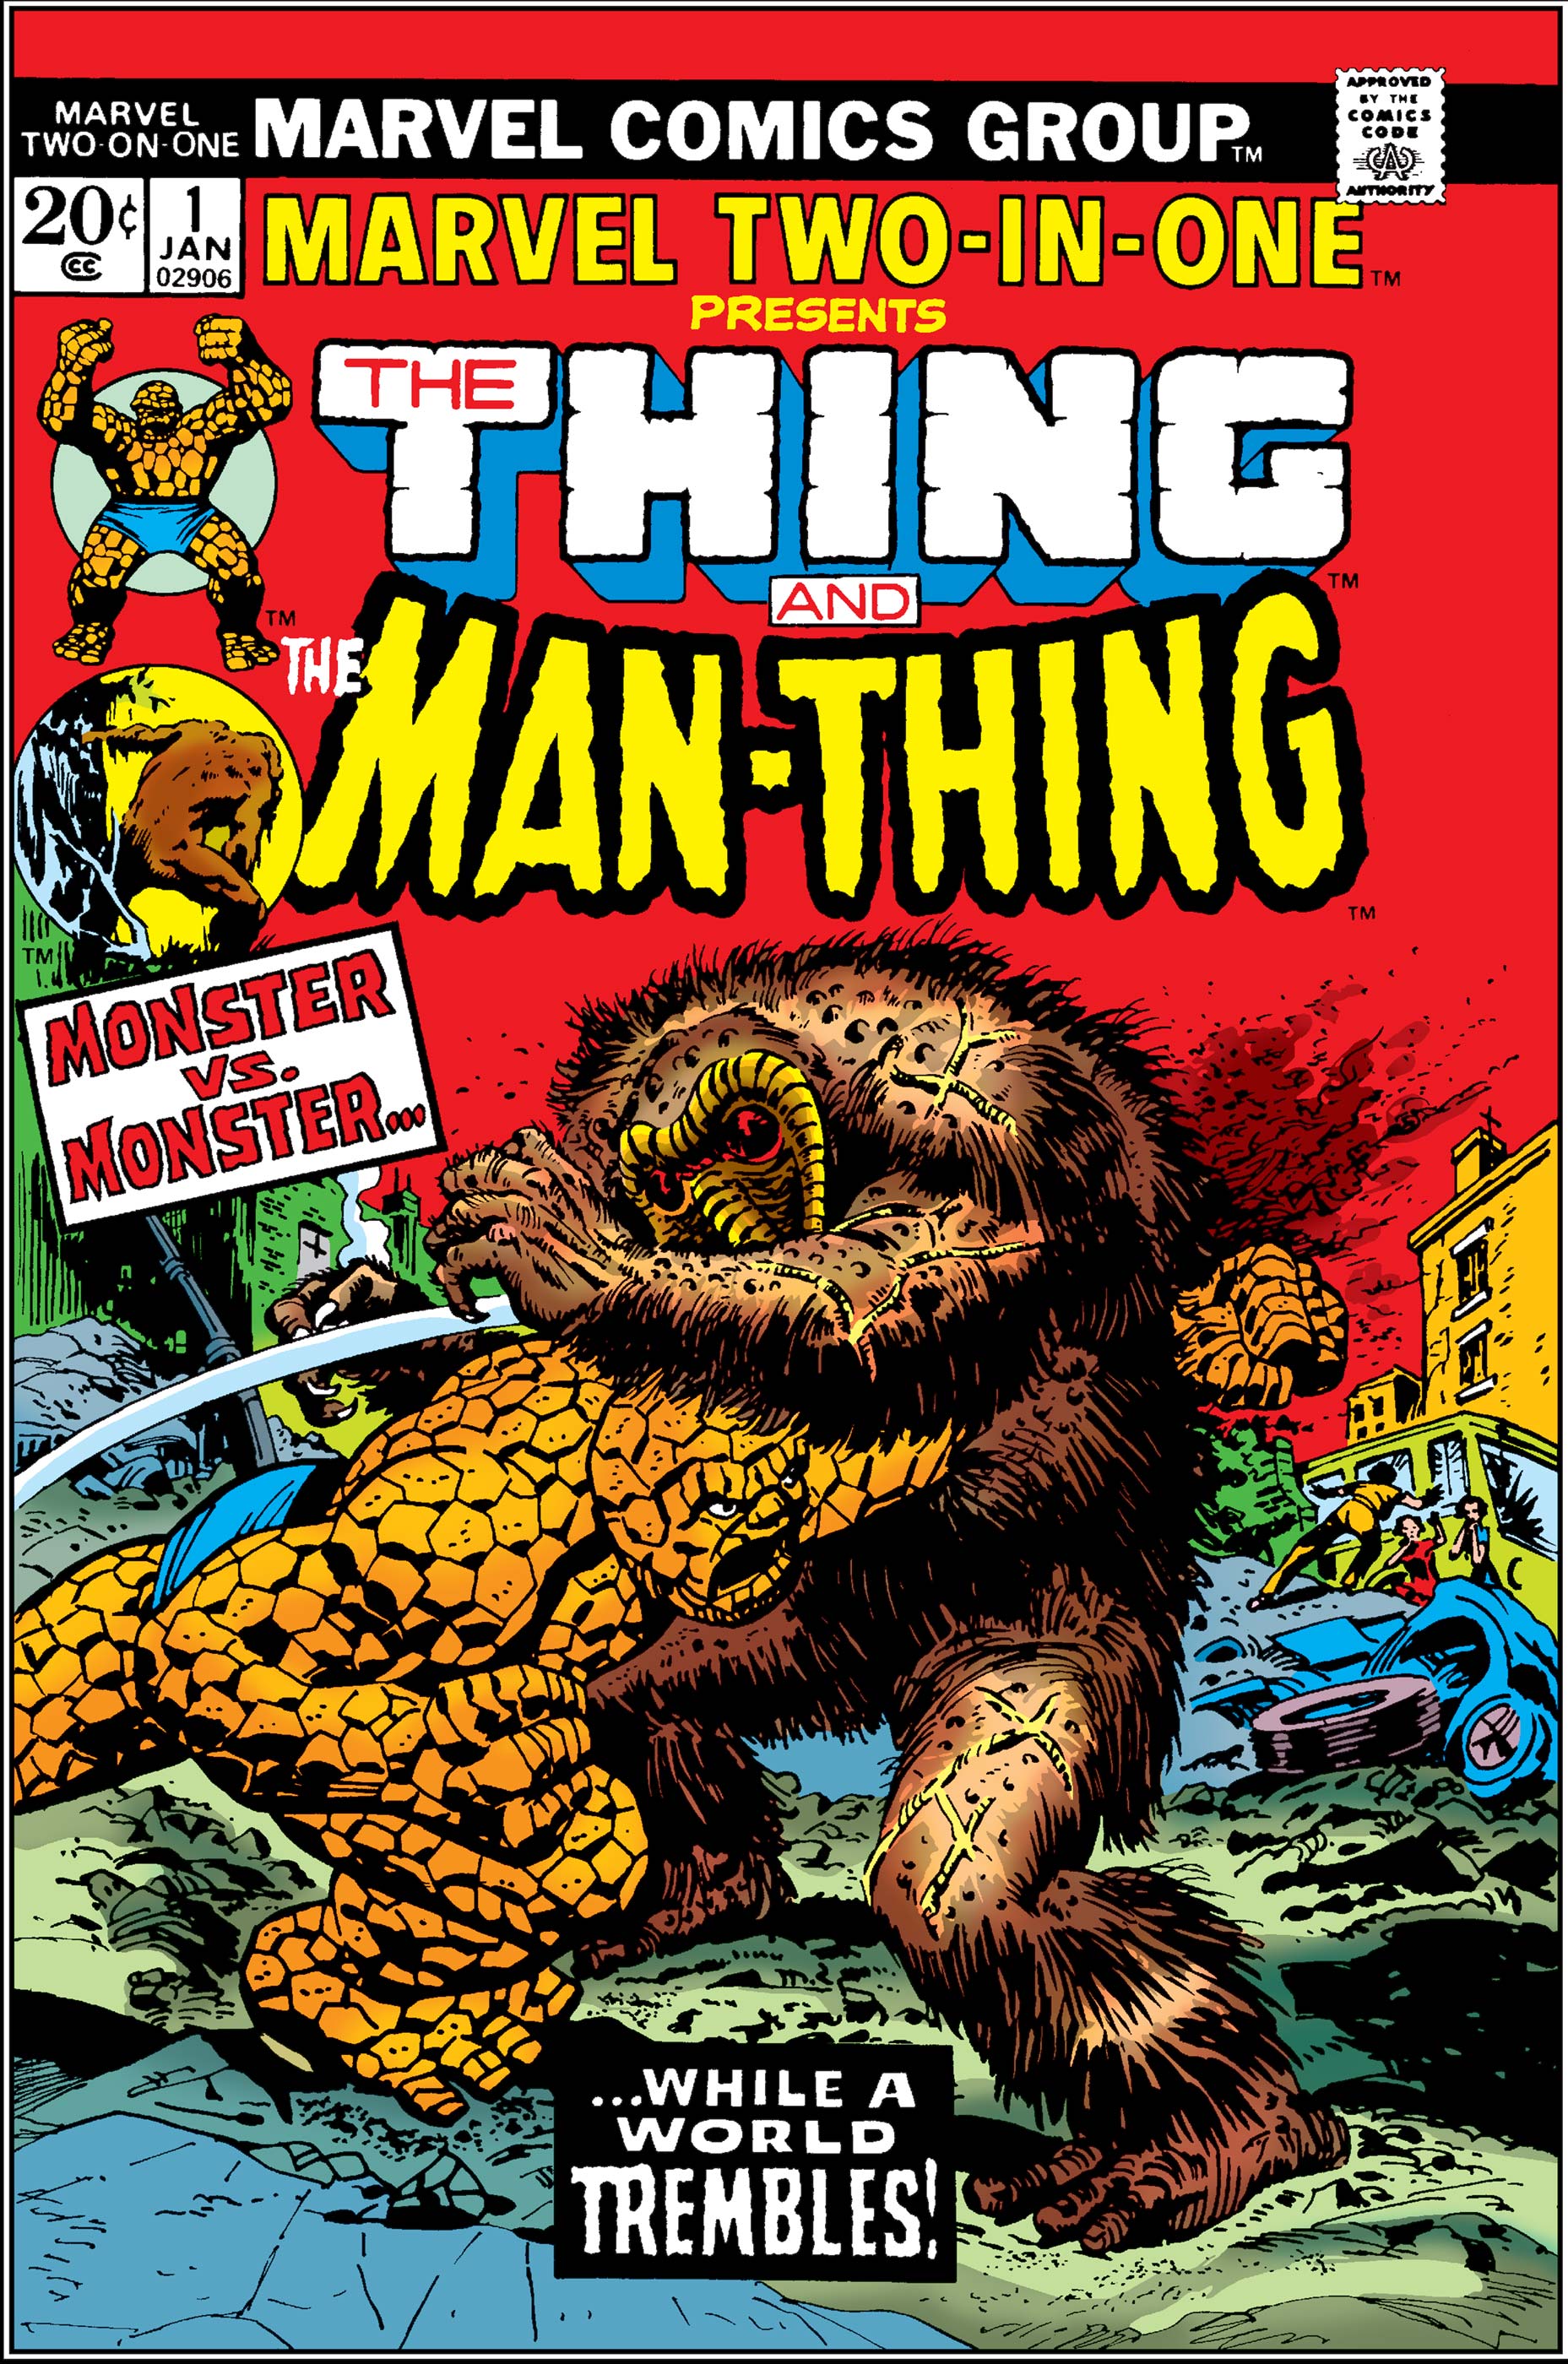 Marvel Two-in-One (1974) #1